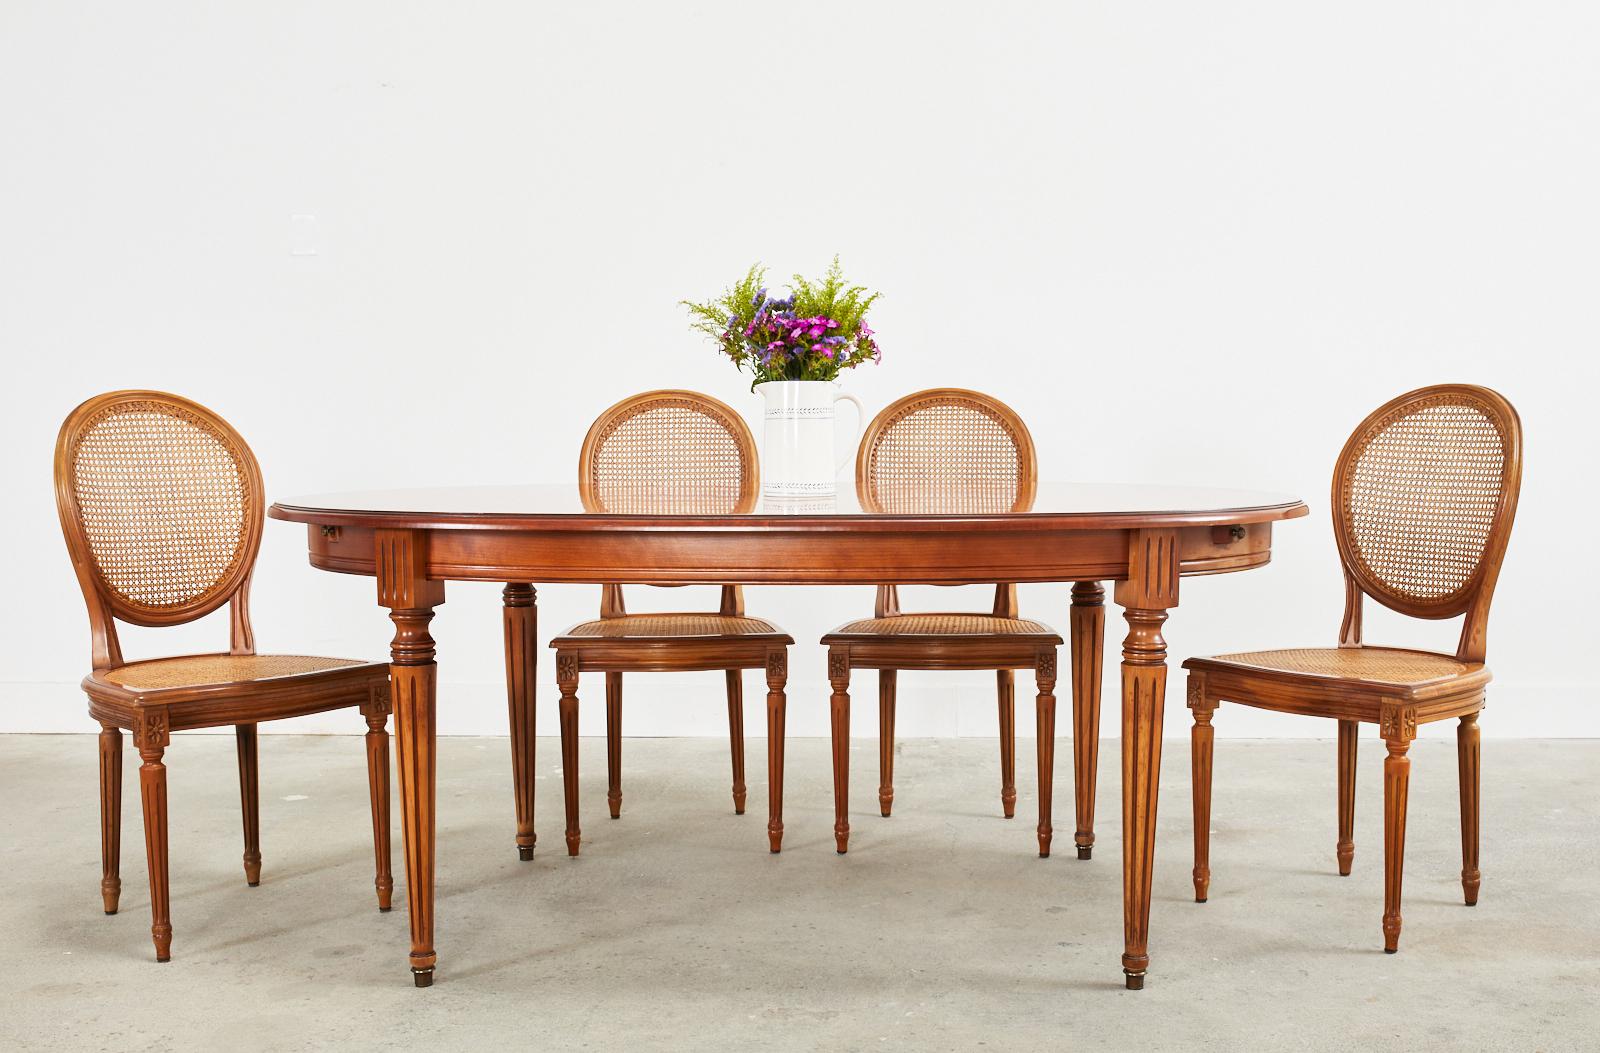 Handsome French dining table with two extending leaves made in the grand Louis XVI style. Constructed from fruitwood giving the table a warm honey tone that is not as formal as a dark mahogany version. The table has an oval form with pull out